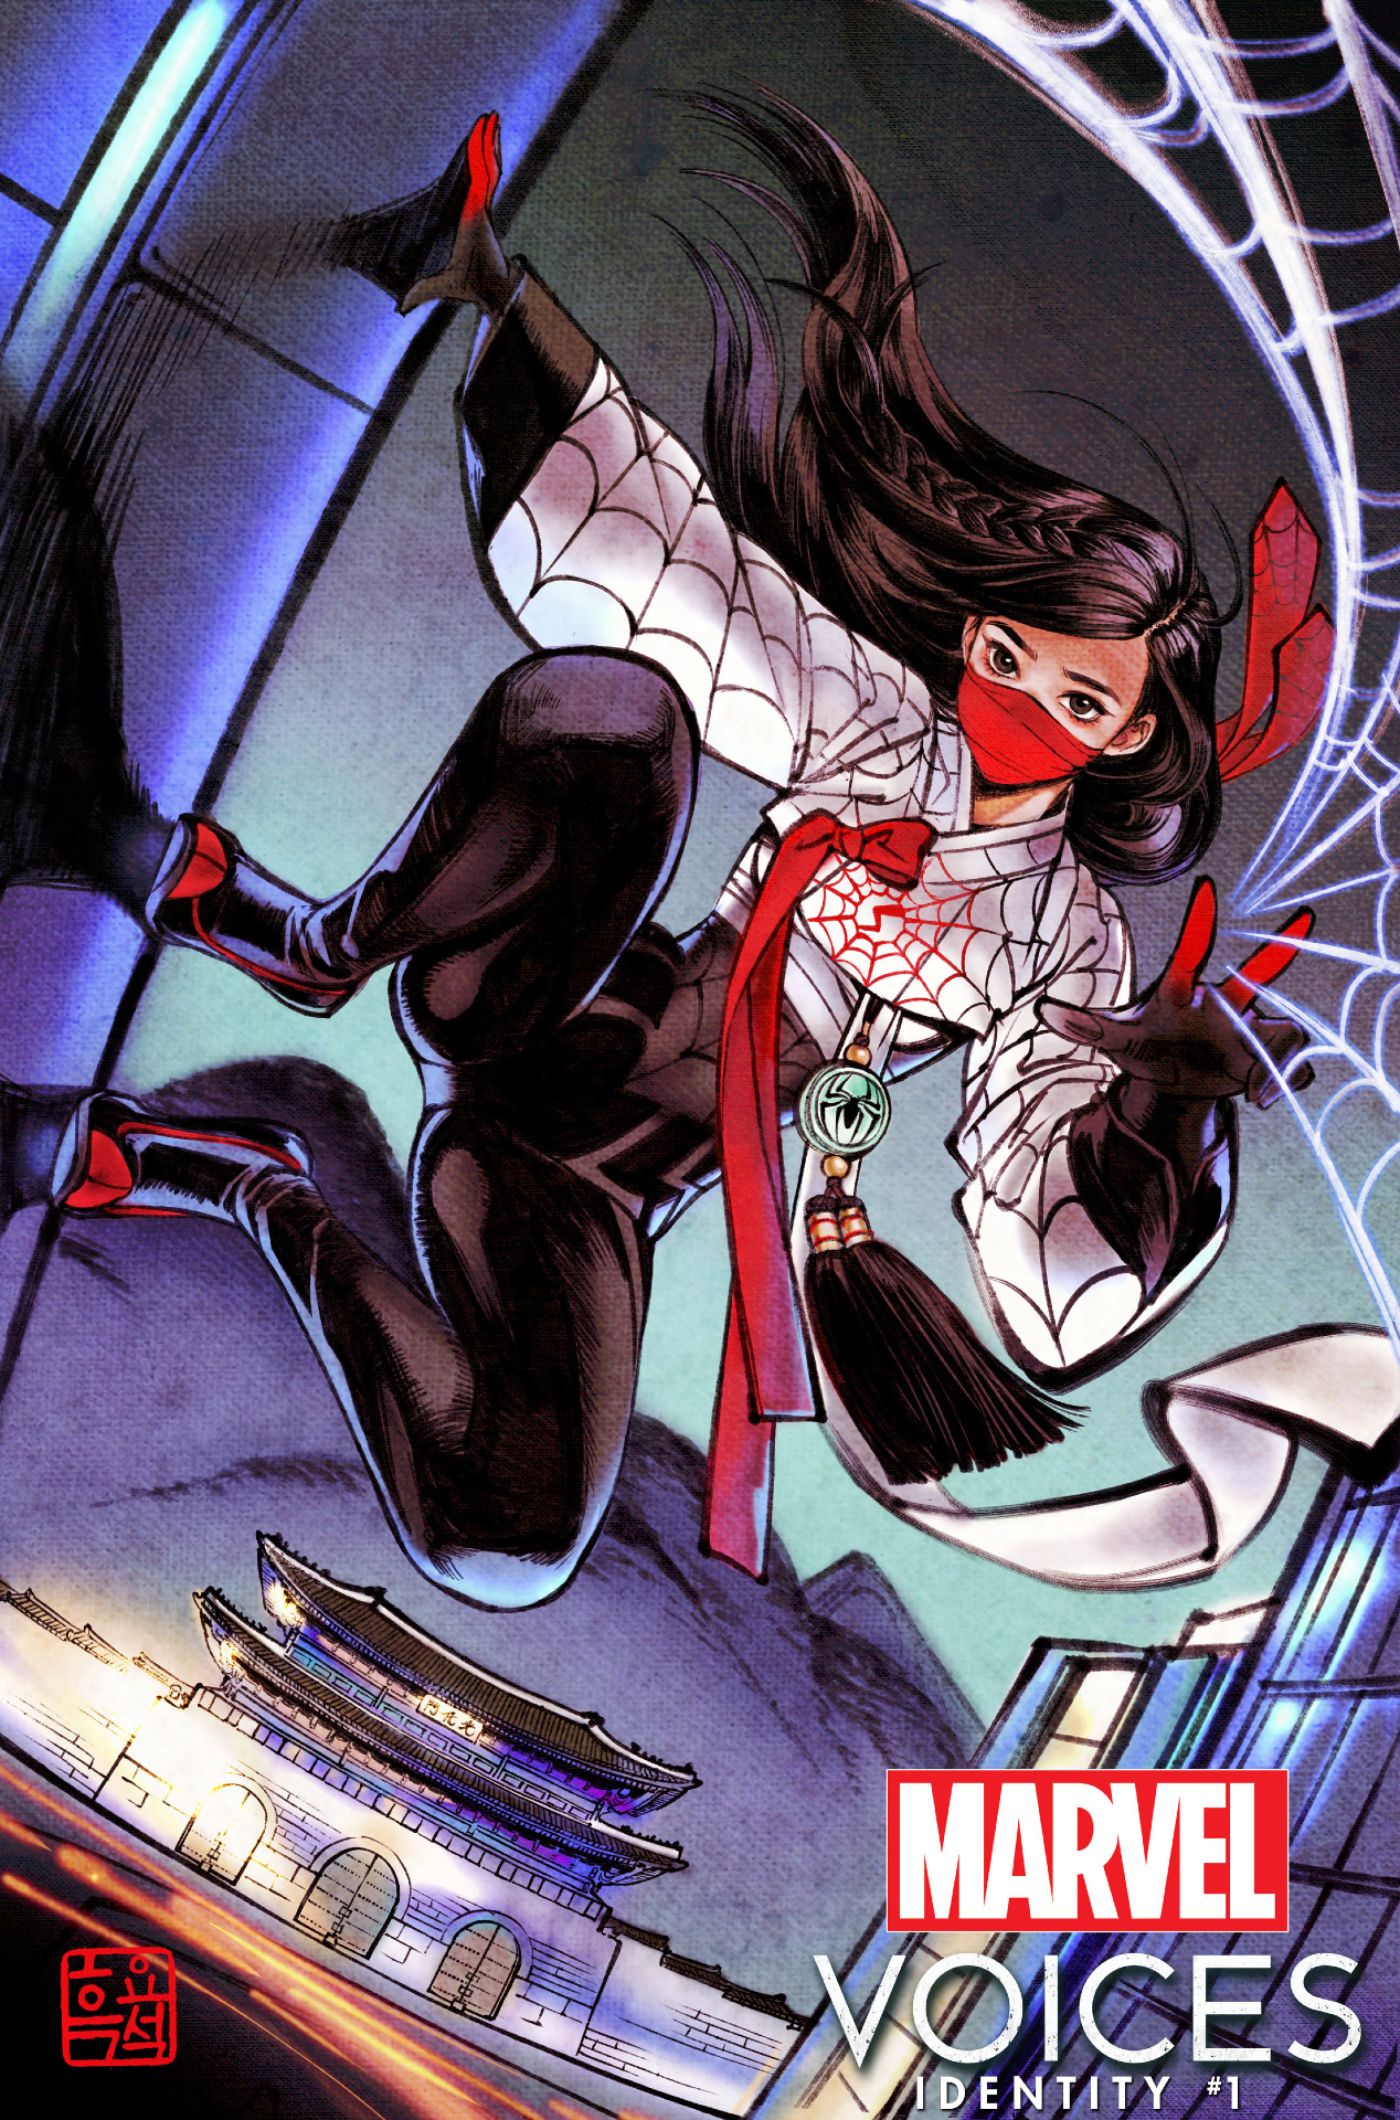 Silk's New Costume for Marvel Voices